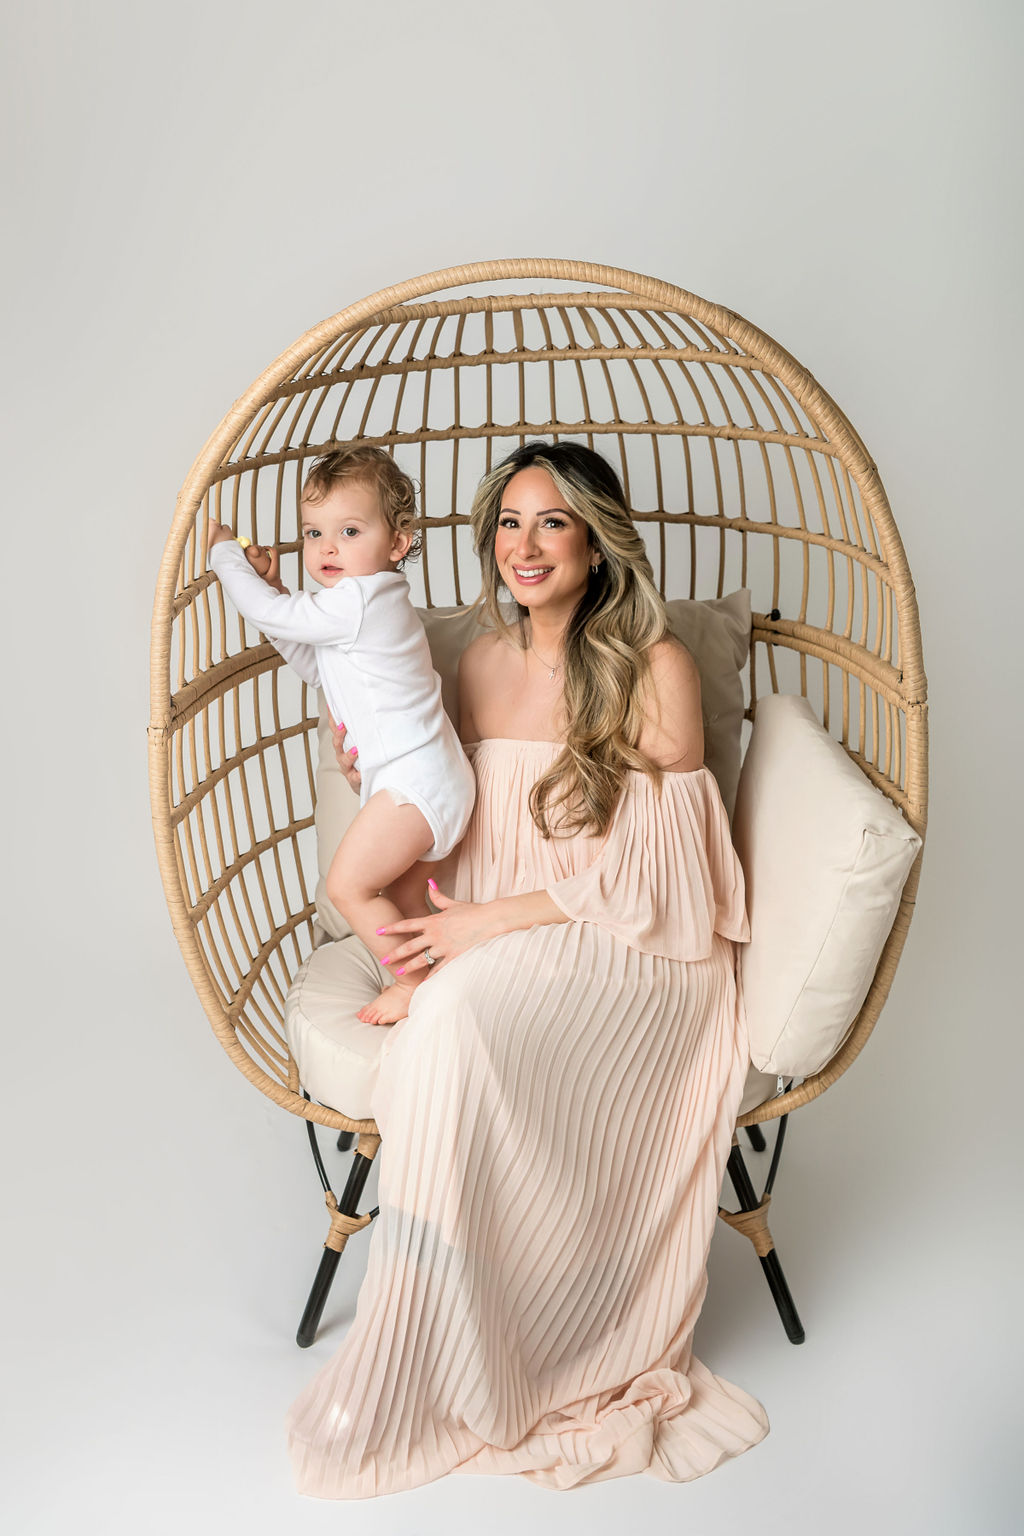 A mother in a pink dress plays in a wicker chair with her climbing toddler in a white onesie after visiting preschools stamford ct